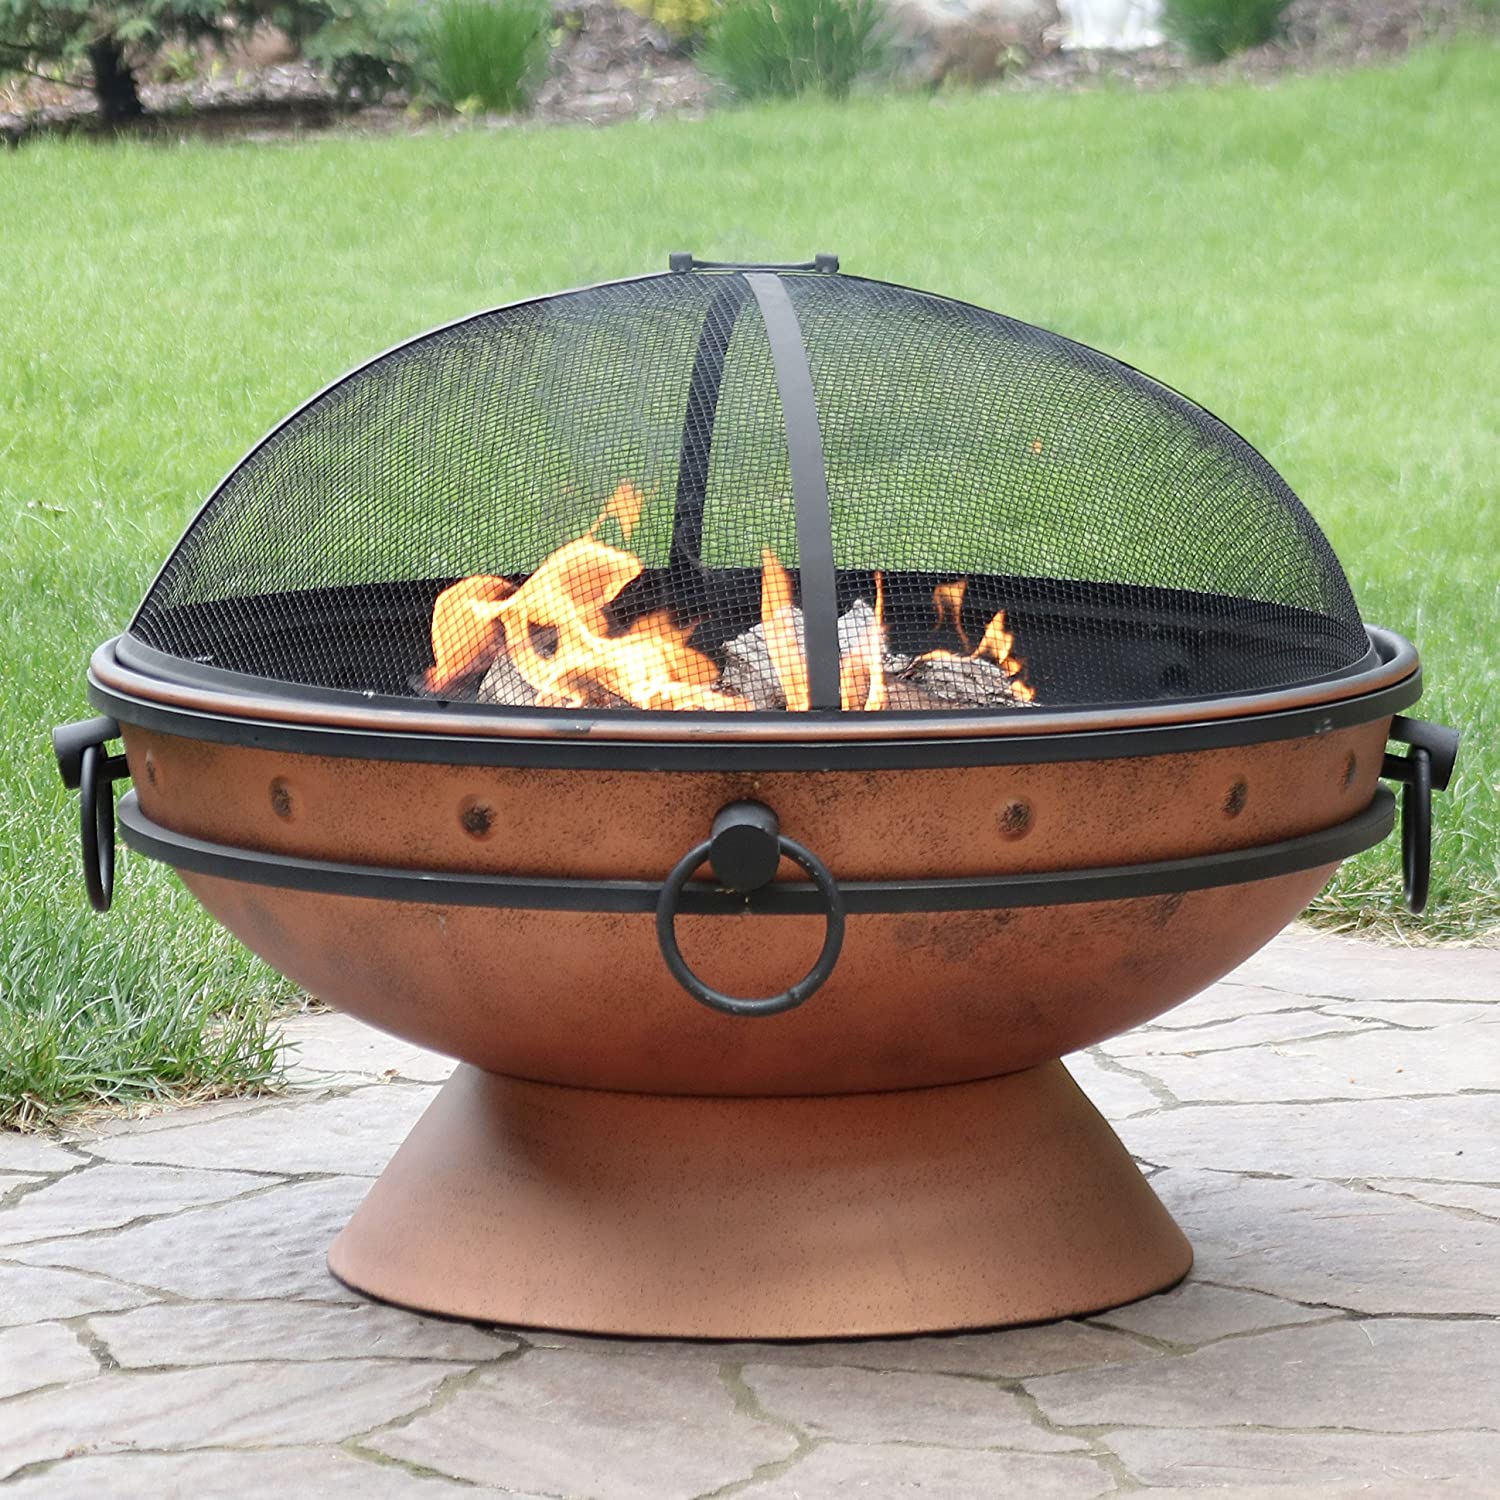 Fire Pits In Stock Now To Extend Your, Pure Garden Fire Pit Parts